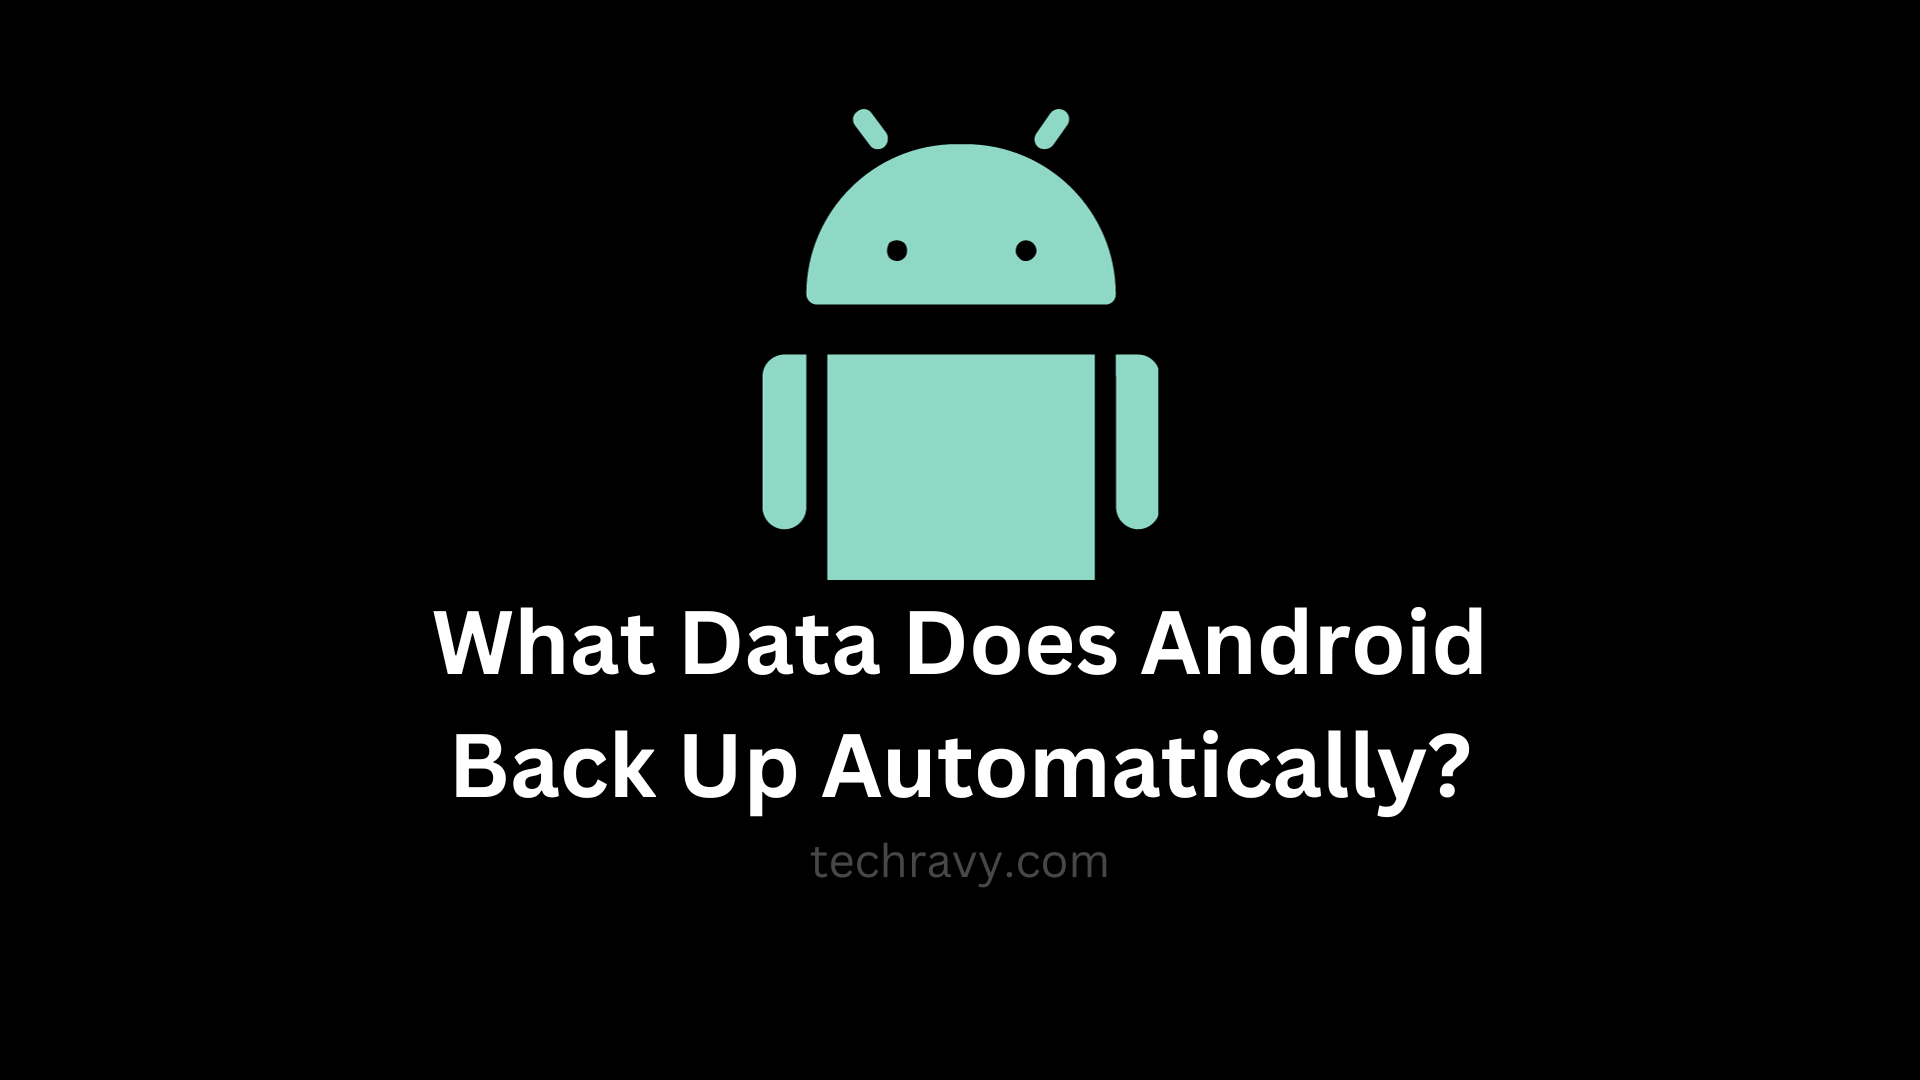 What Data Does Android Back Up Automatically